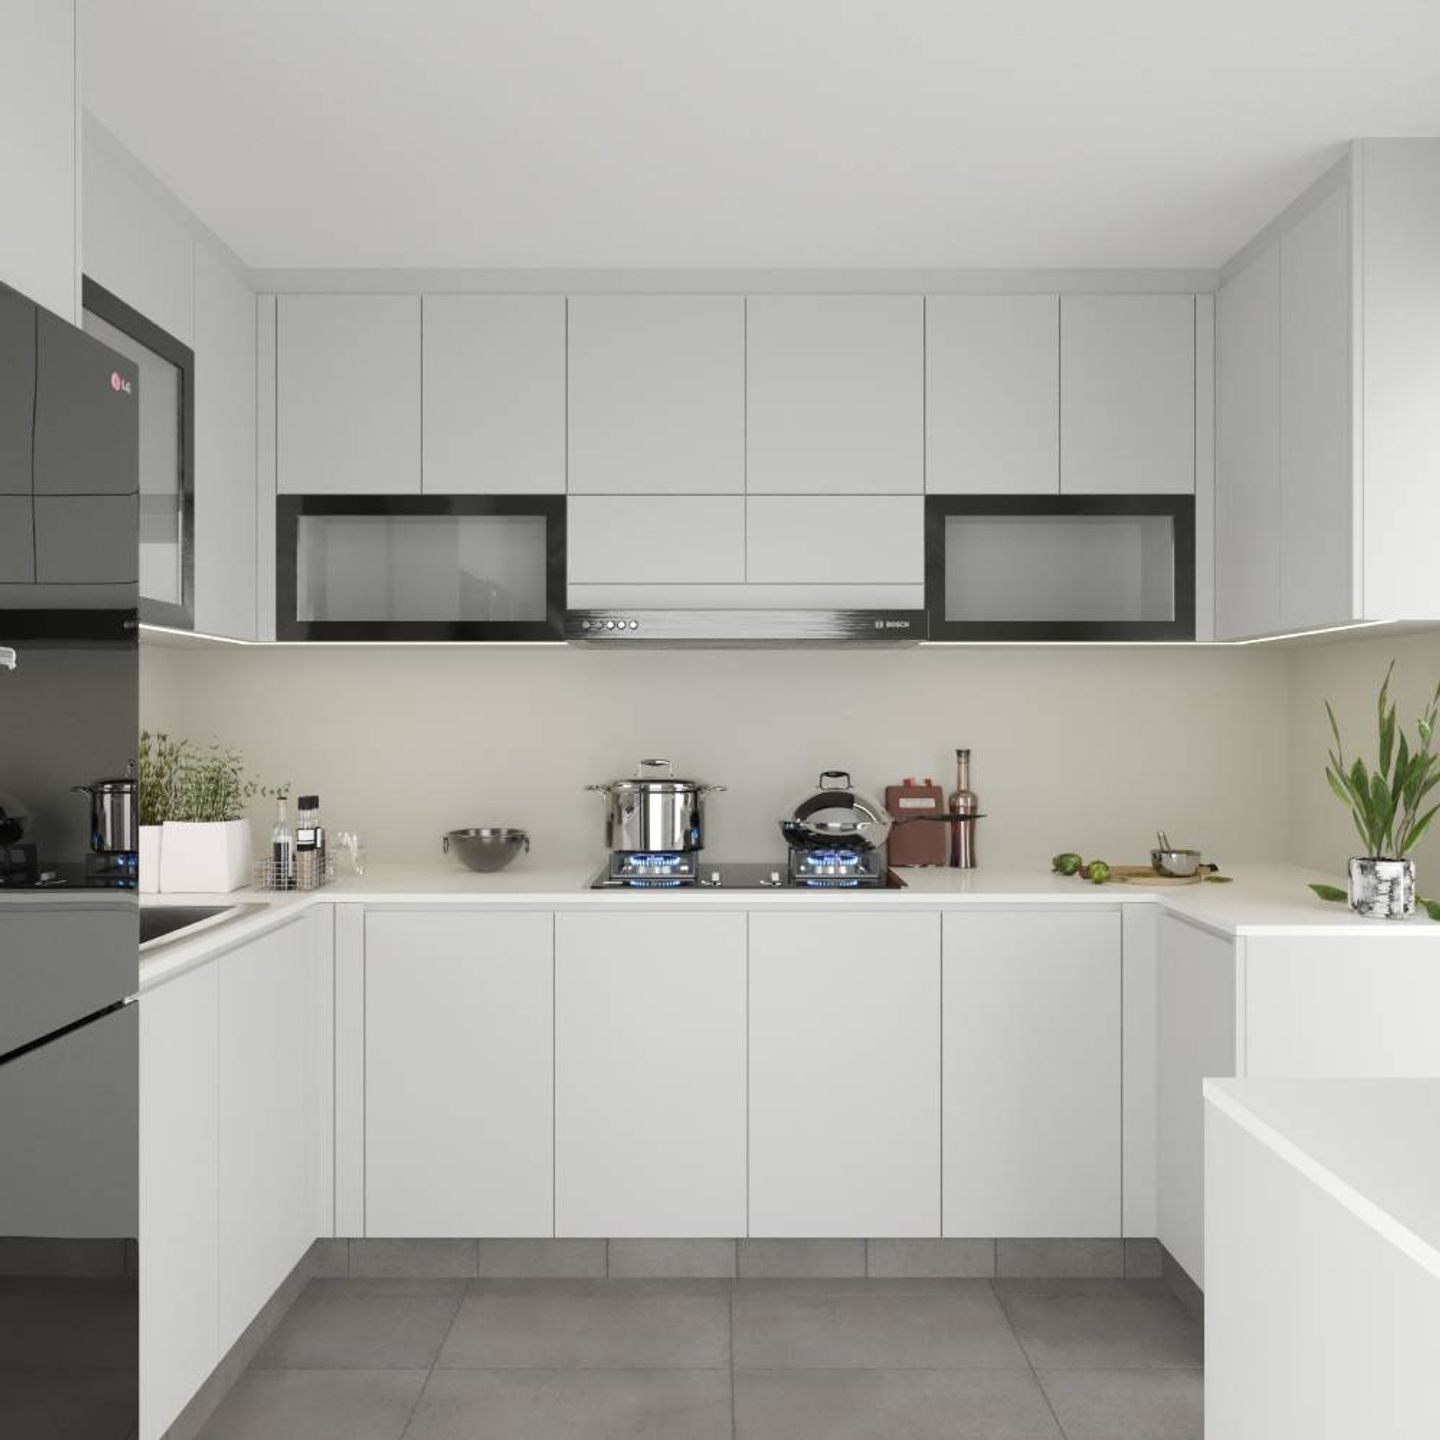 U-Shaped White Kitchen Cabinet Design With Solid Countertop - Livspace